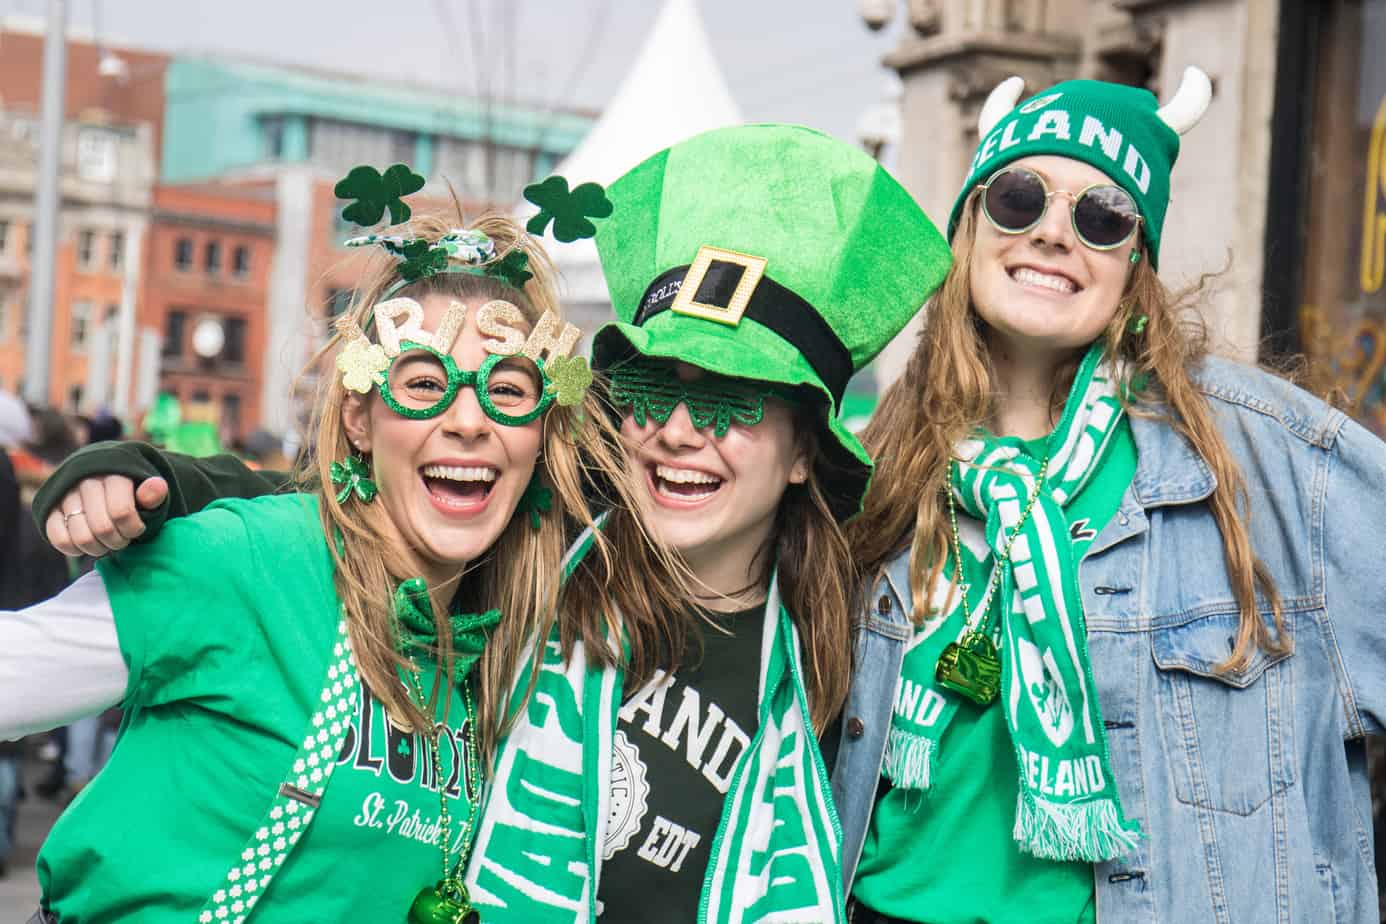 women dressed in festive green clothing celebrate st. patrick's day